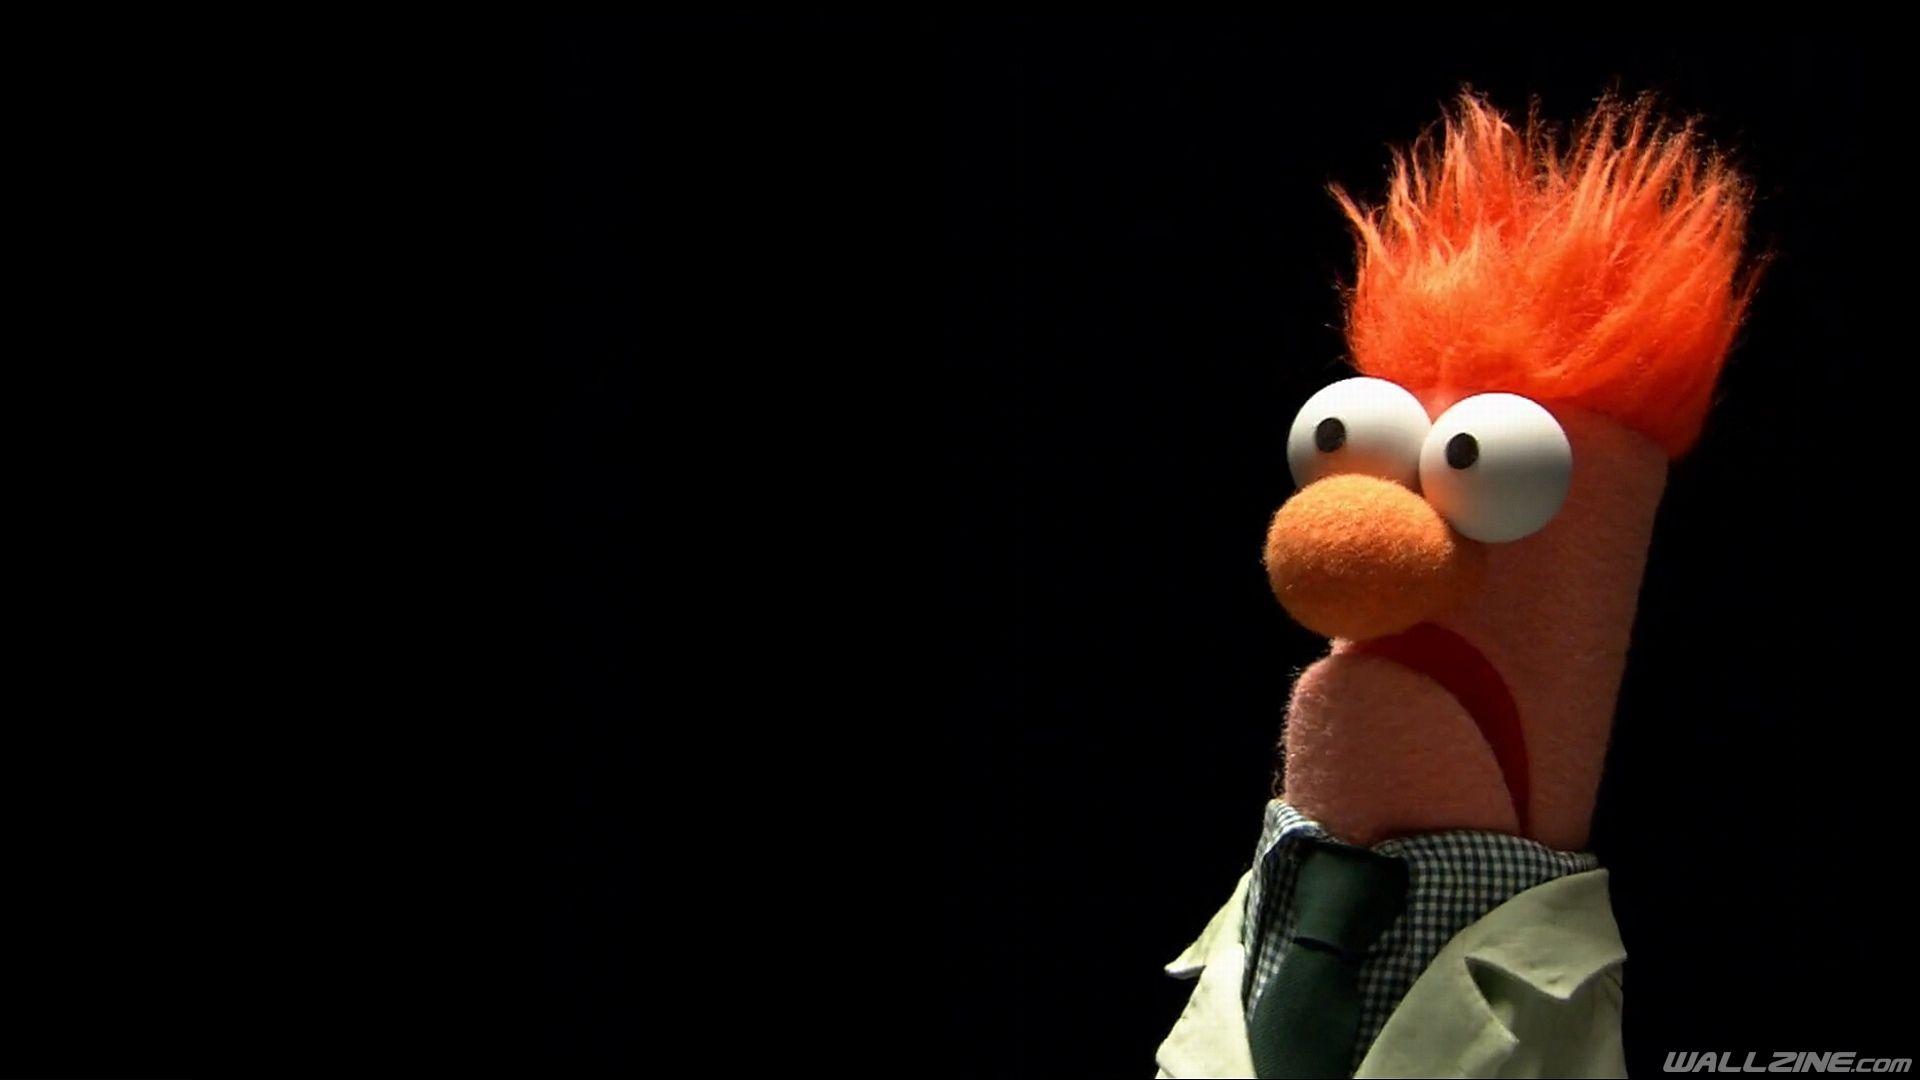 Funny Scared Wallpaper. The muppet show, Funny wallpaper, Geek stuff